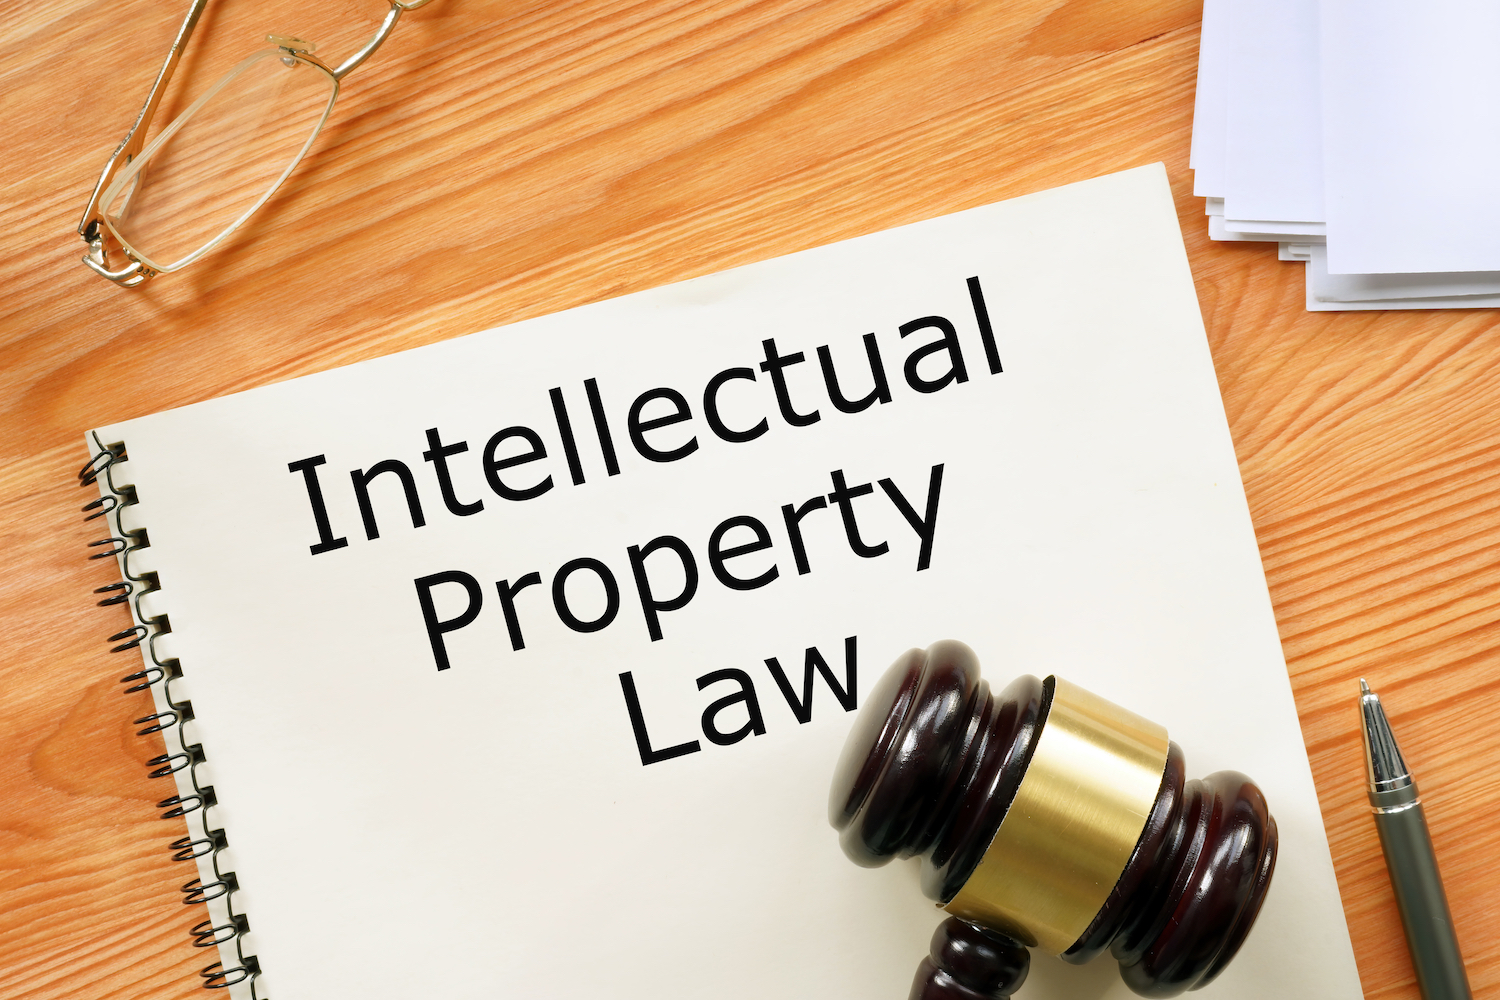 Trusted Intellectual Property Experts in Colorado Springs for Your Legal Needs